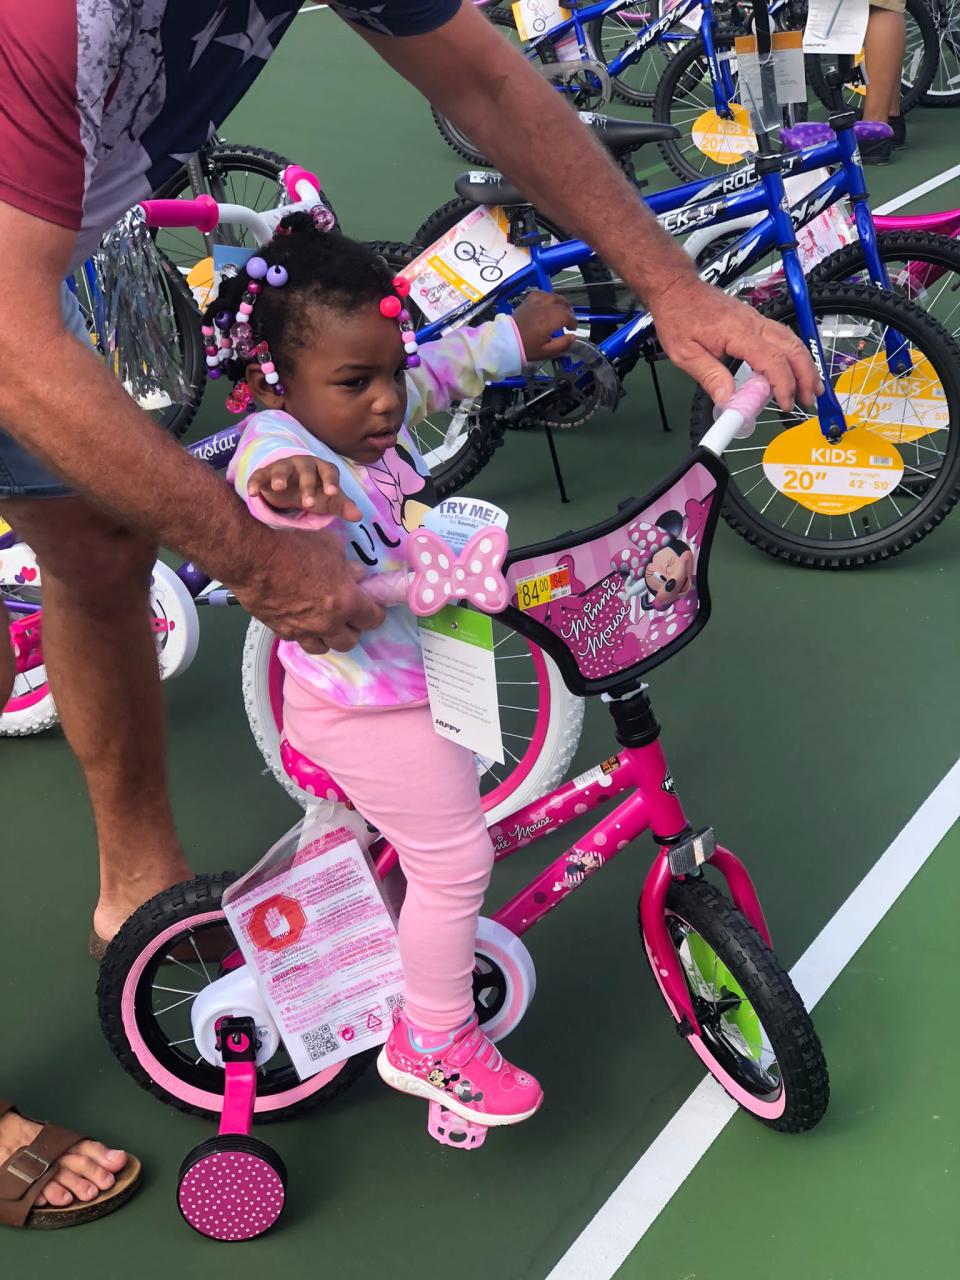 A little girl got a bike just her size, complete with training wheels, at last year's annual bike giveaway in Daytona Beach.